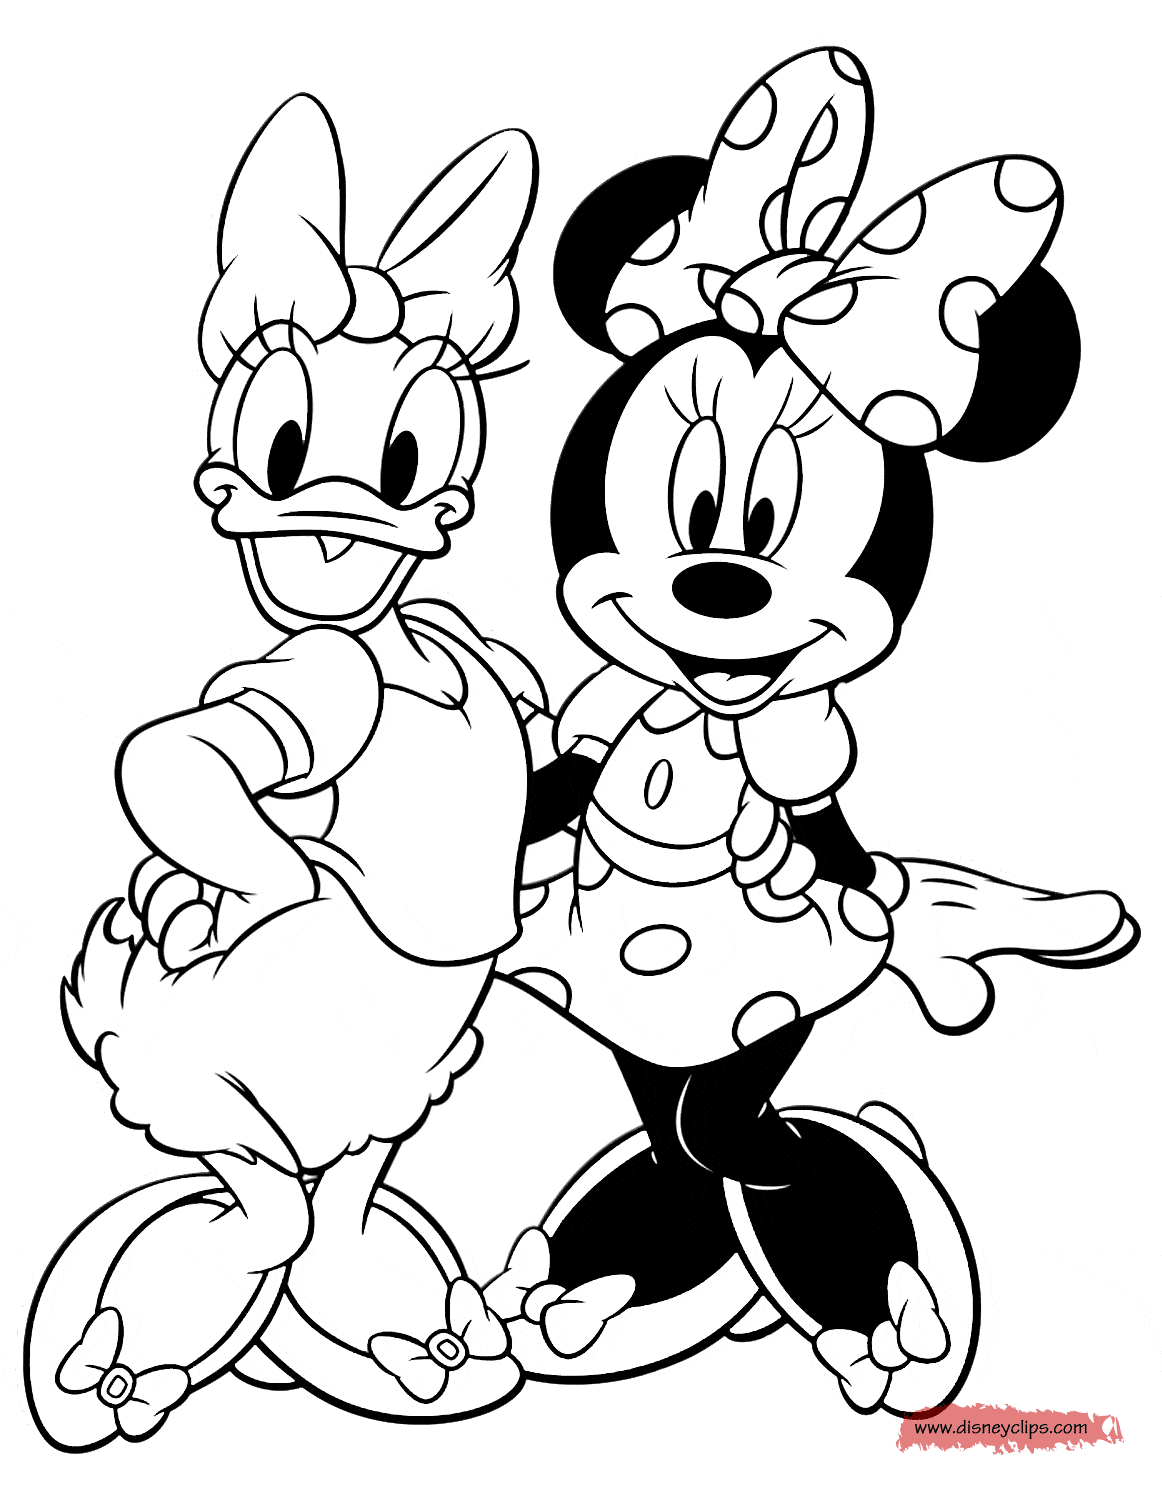 Mickey Mouse & Friends Coloring Pages 20   Disneyclips.com